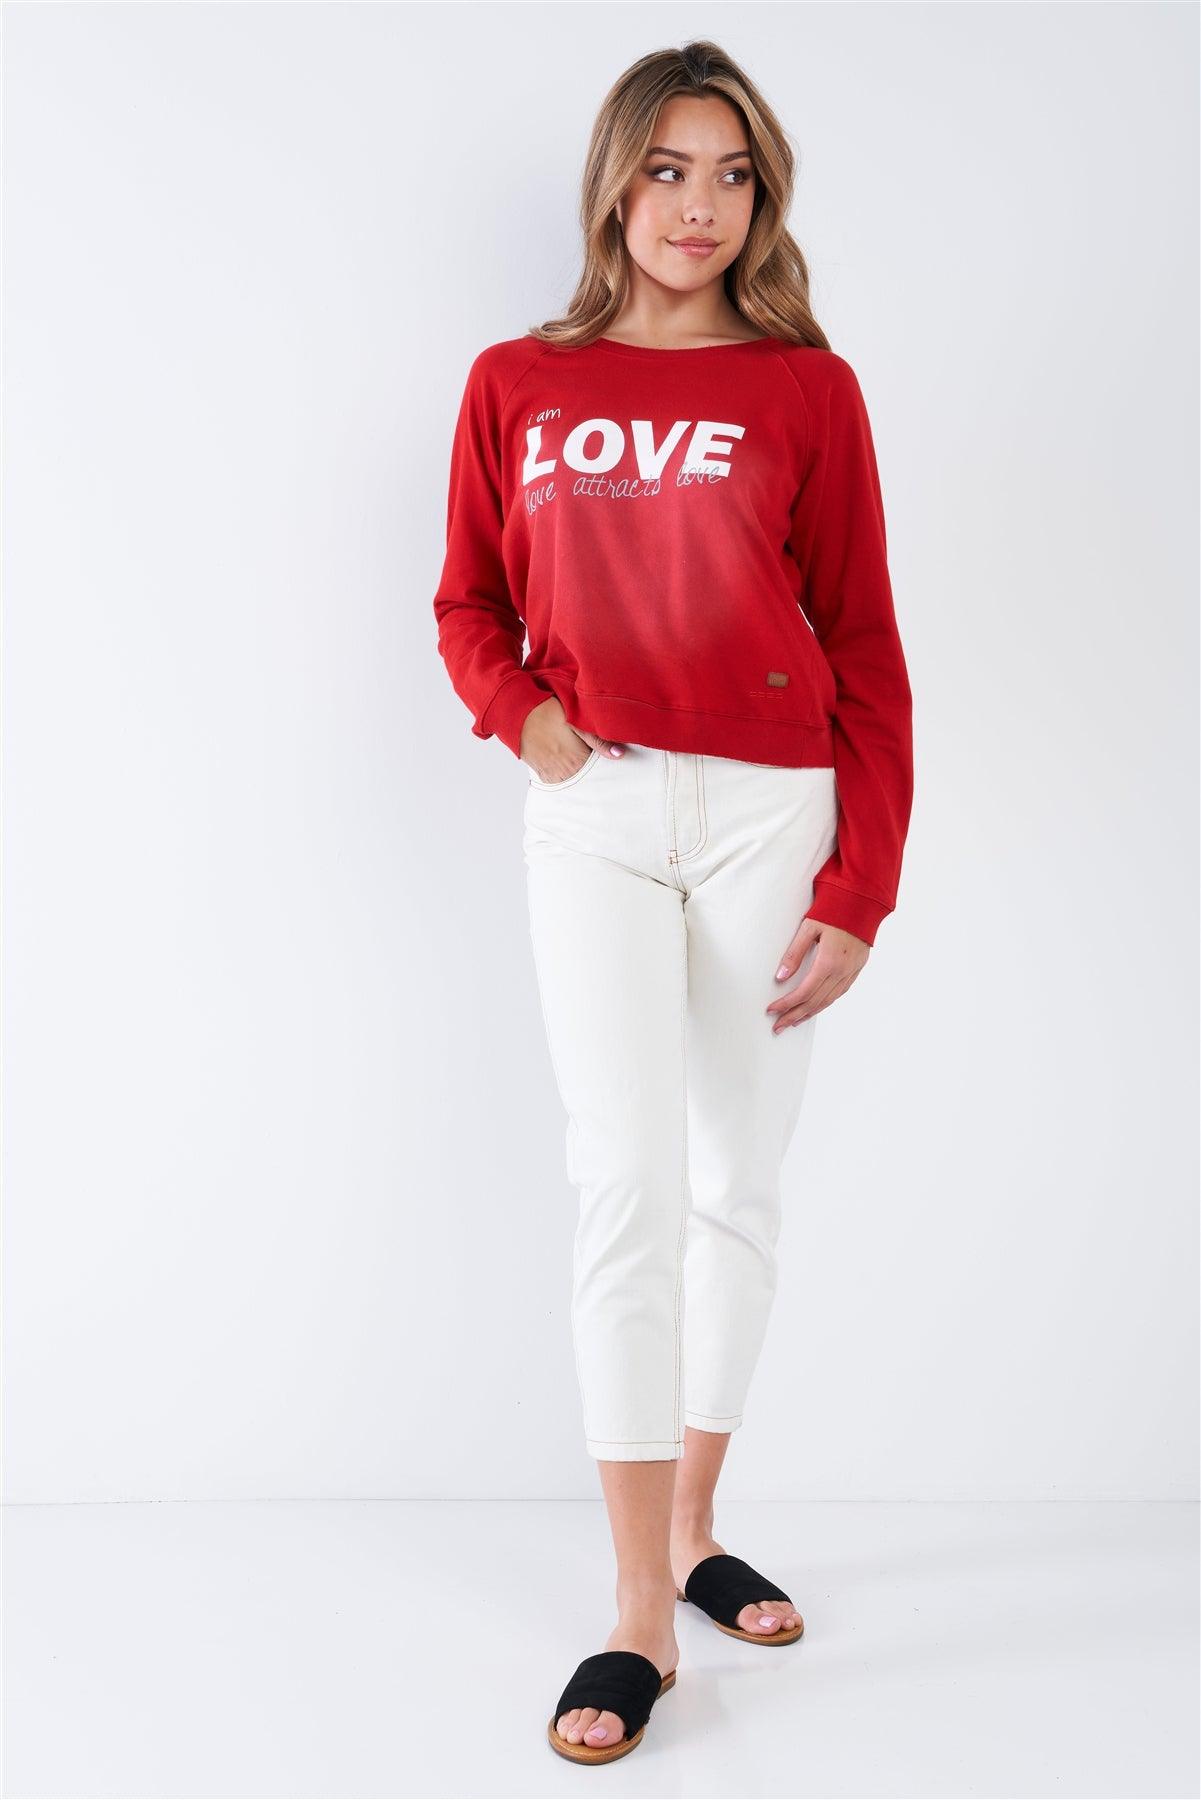 Samba Red "I Am Love, Love Attracts Love" Long Sleeve Crew Neck Top